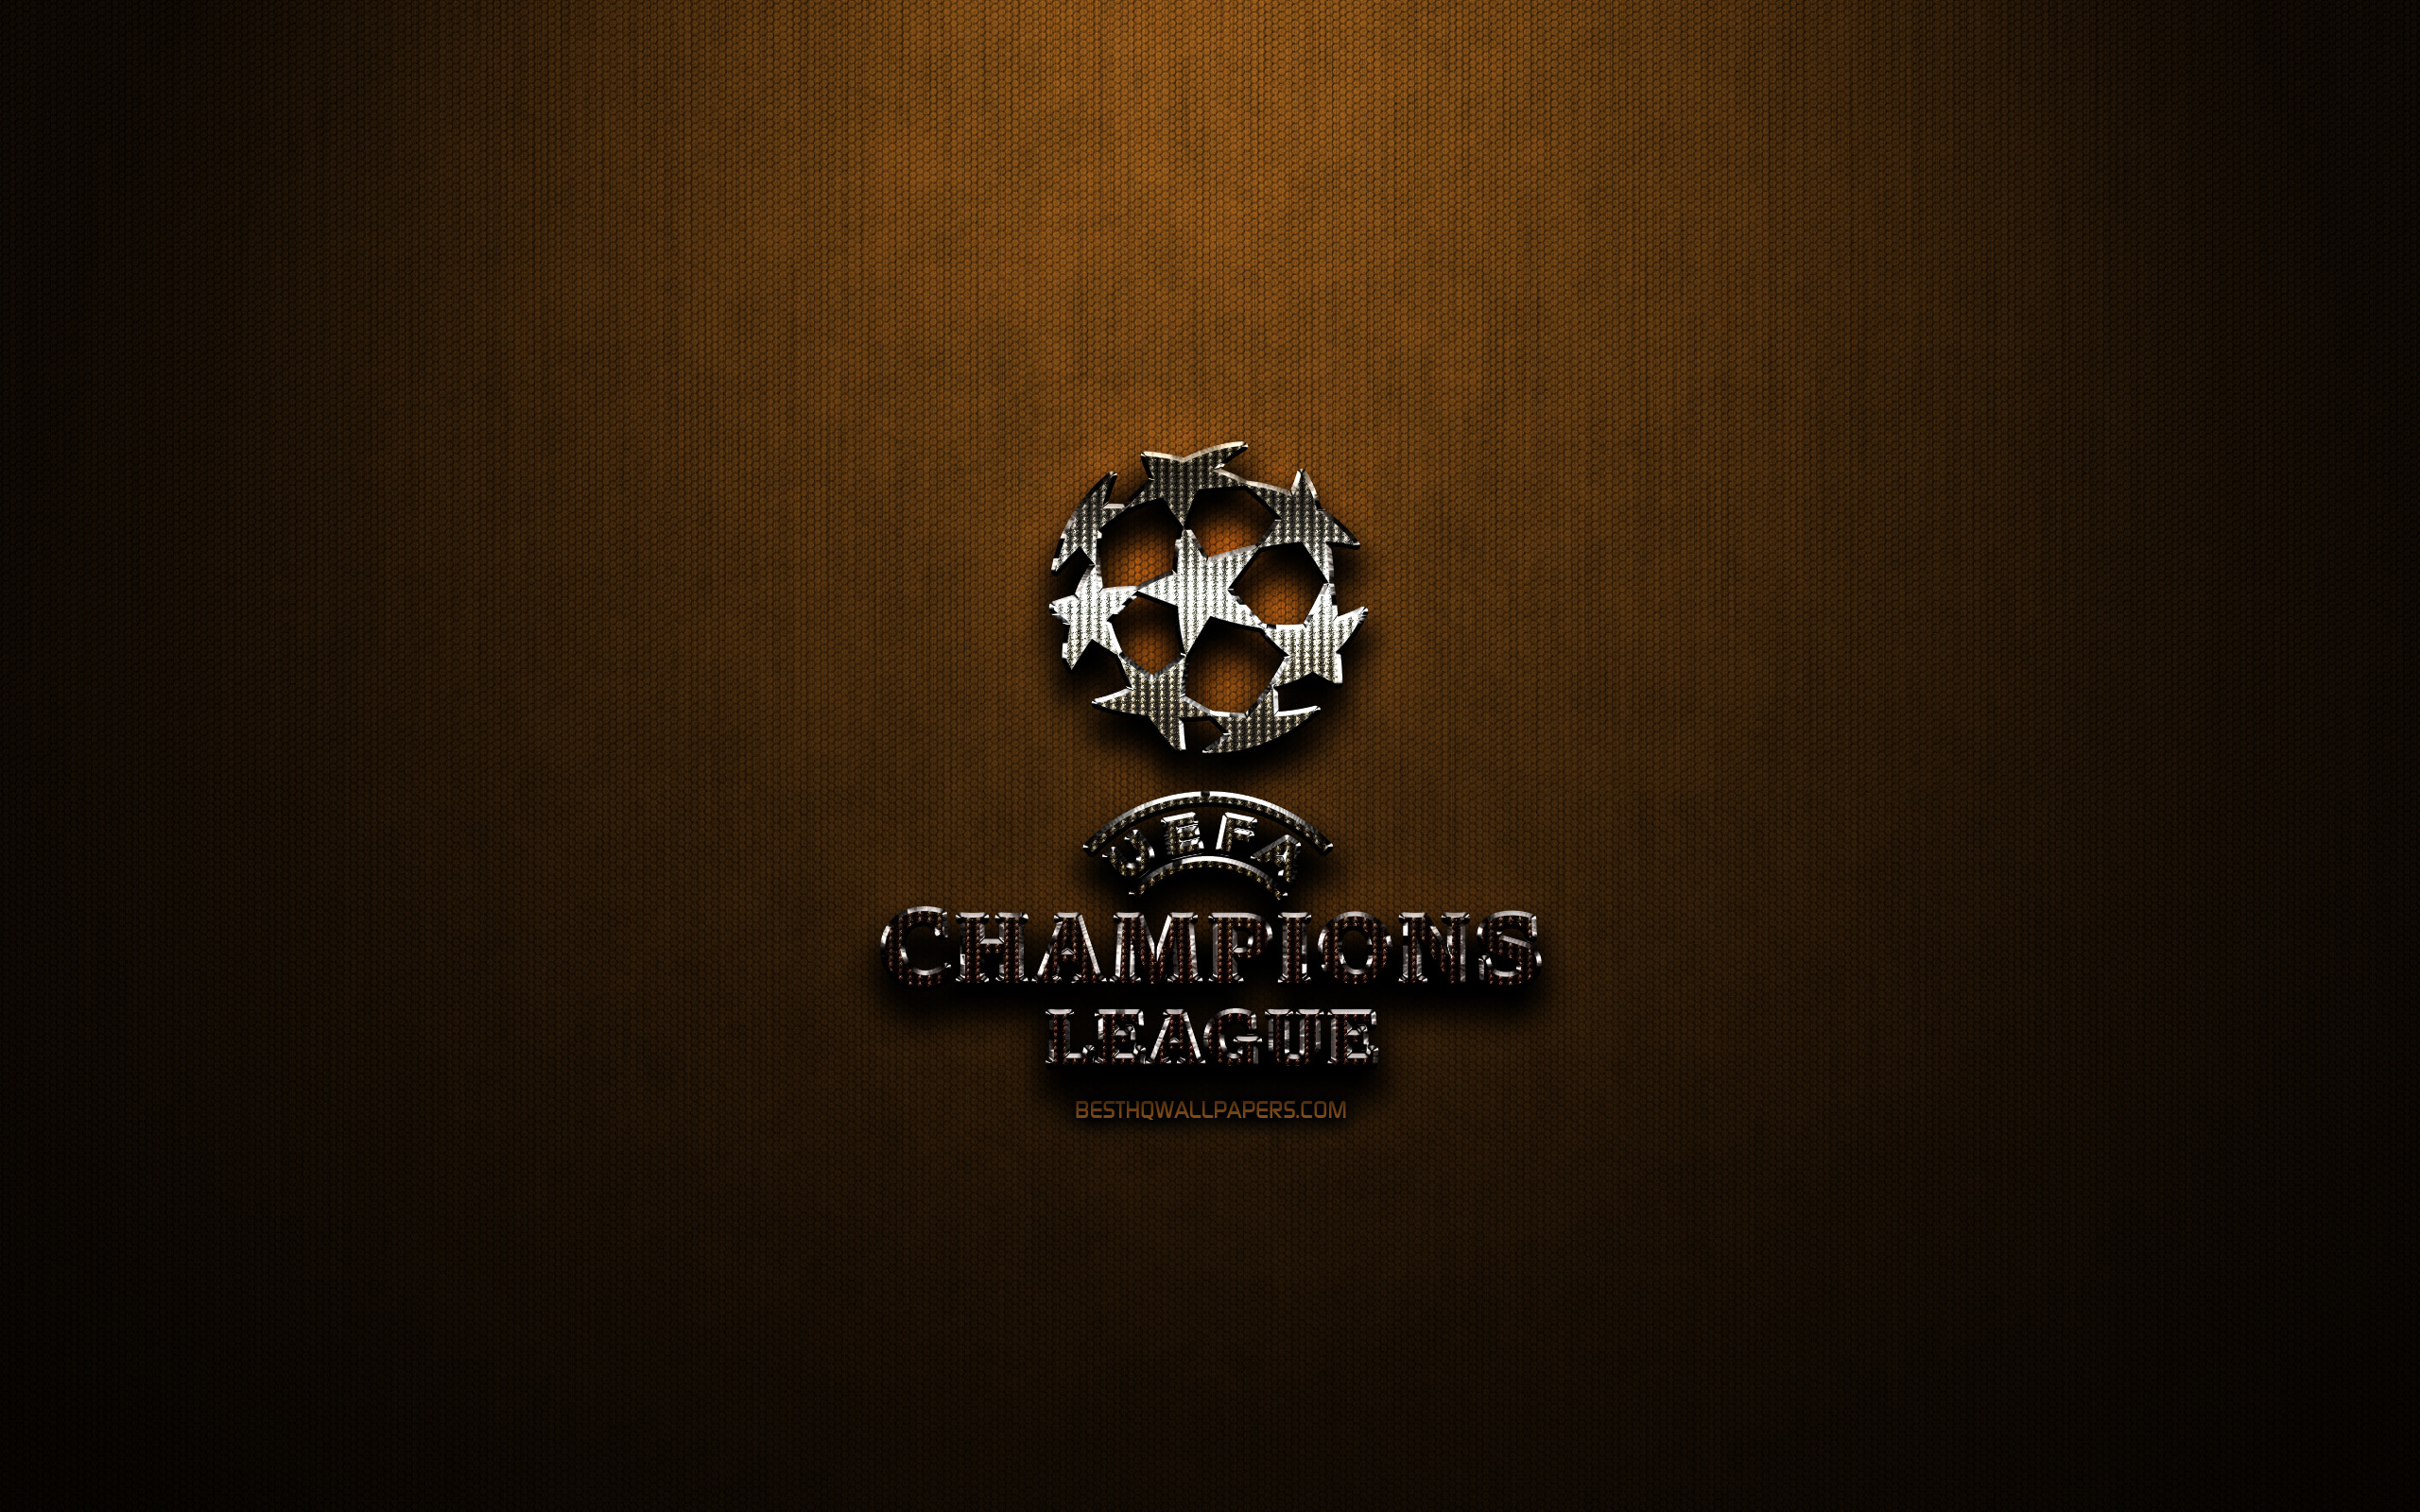 Download wallpaper UEFA Champions League glitter logo, football leagues, creative, bronze metal background, UEFA Champions League logo, brands, UEFA Champions League for desktop with resolution 2560x1600. High Quality HD picture wallpaper